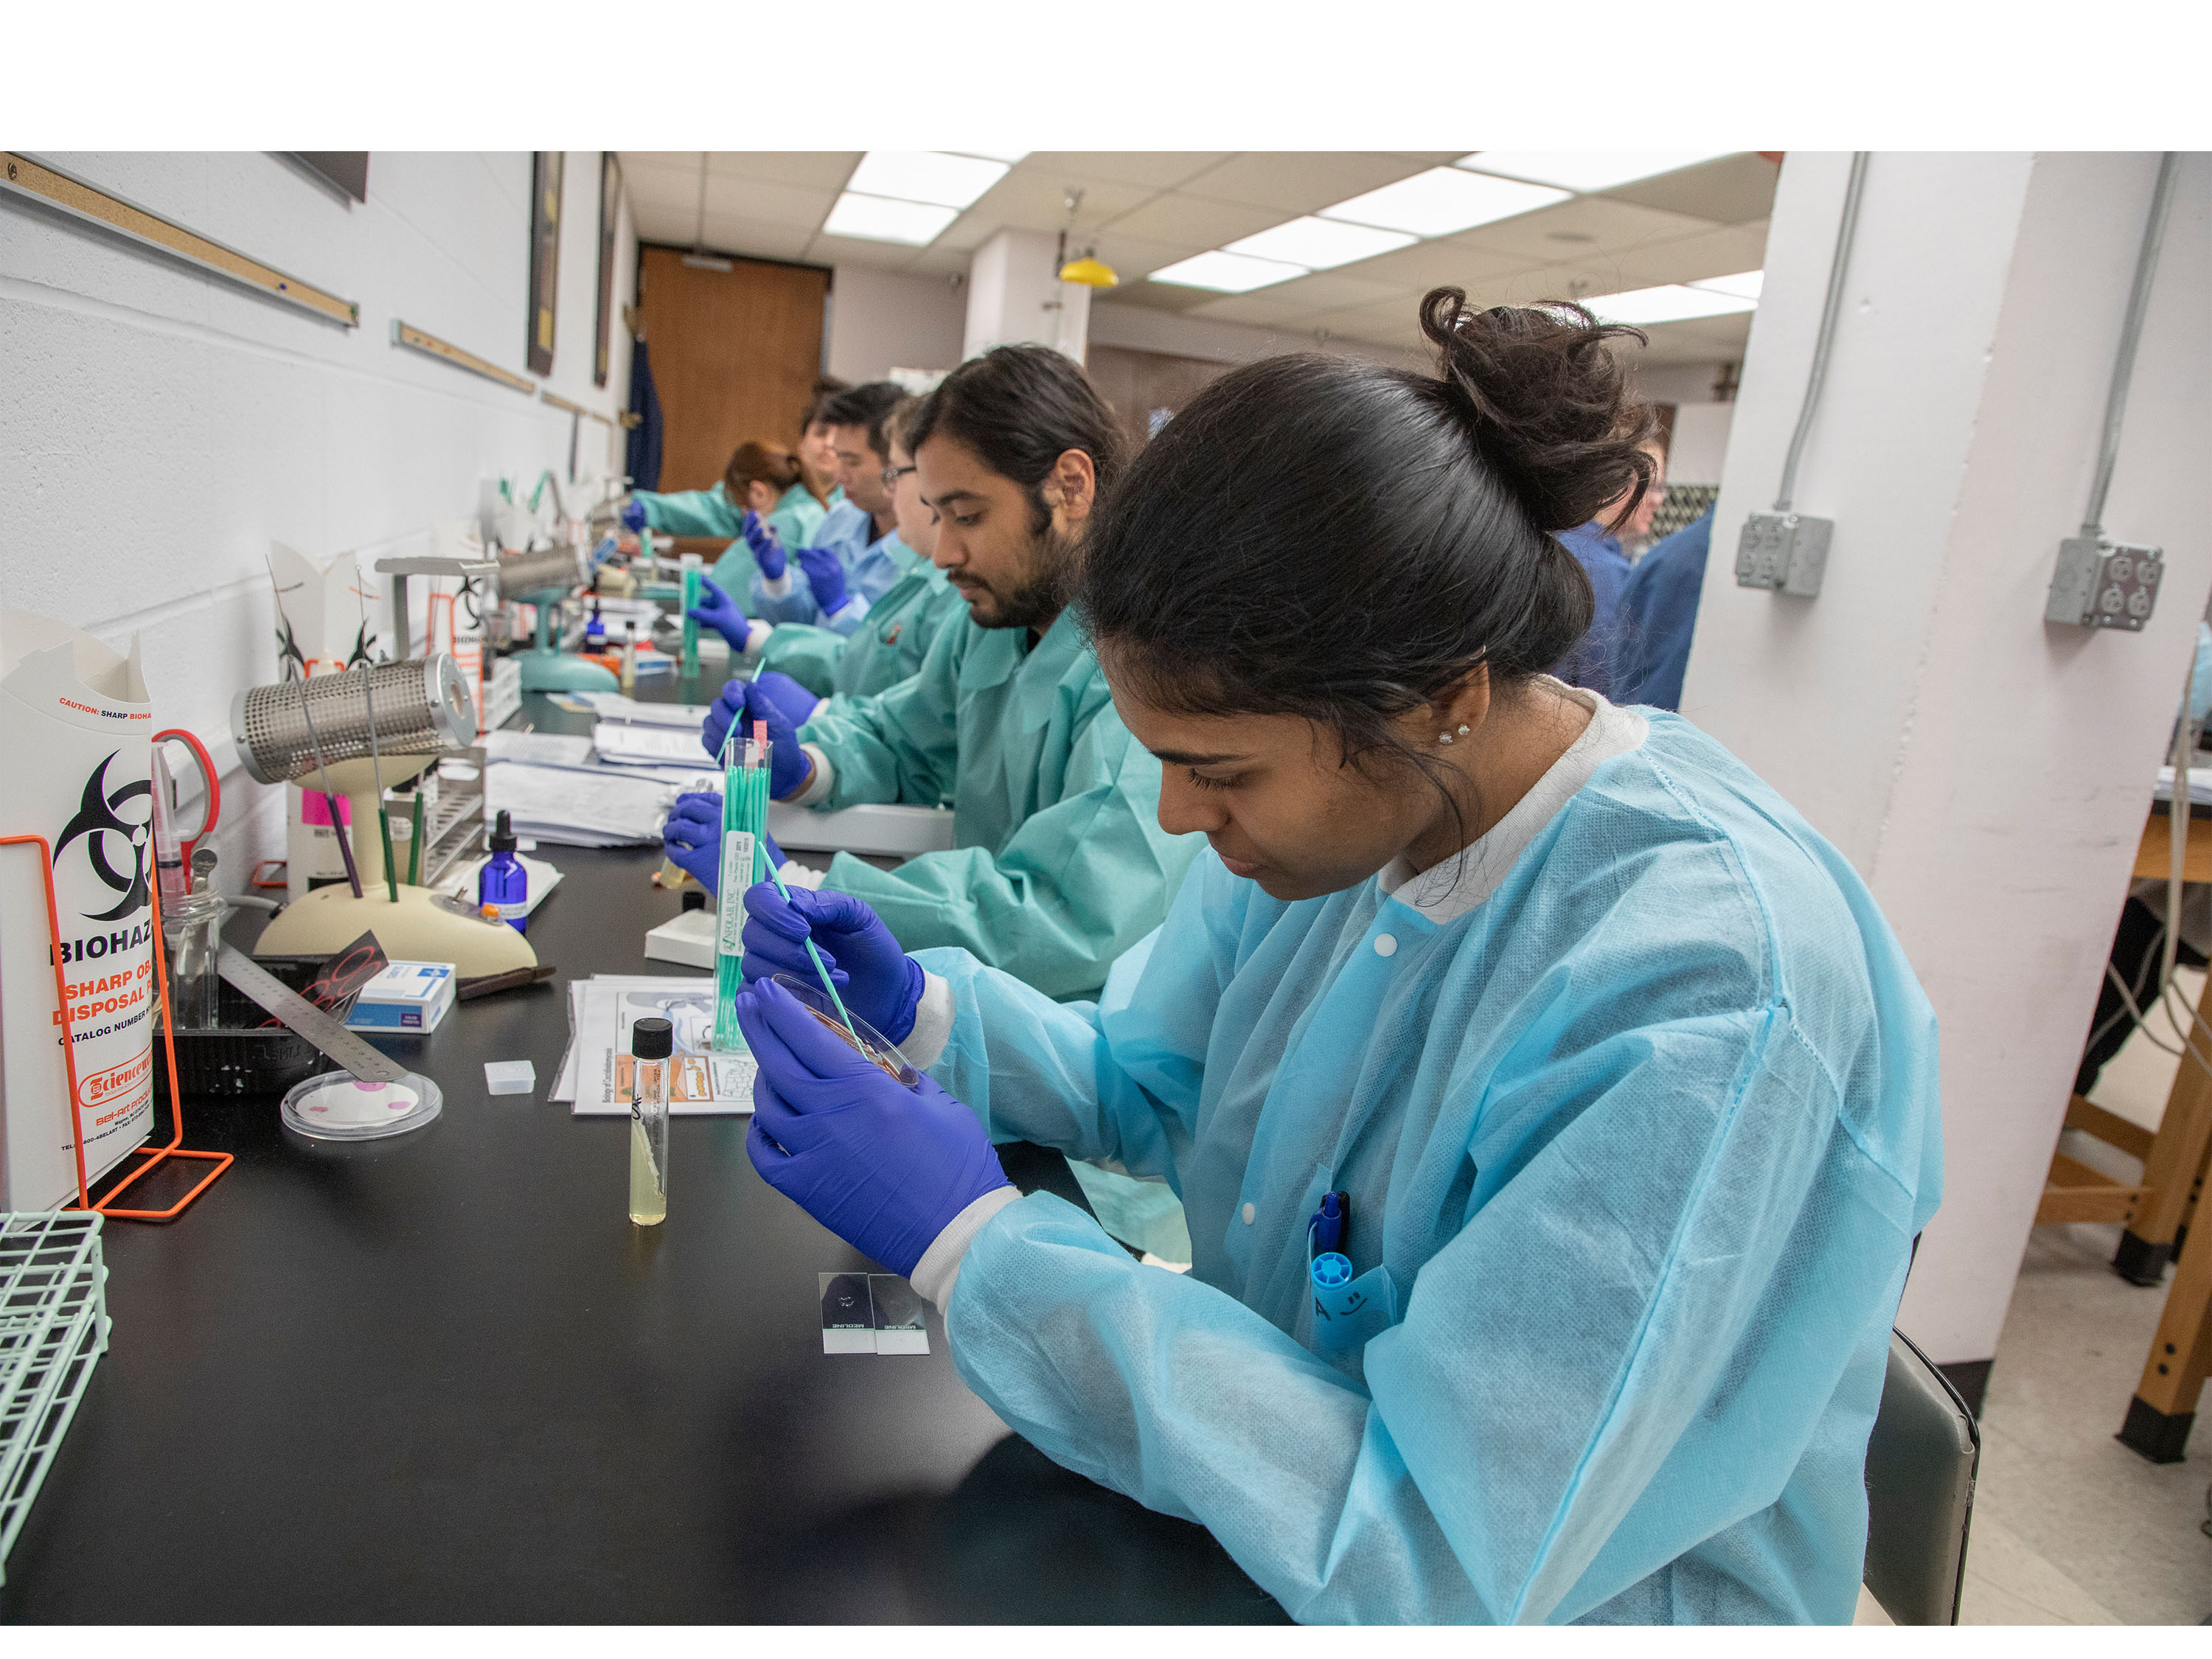 MLS students work in lab